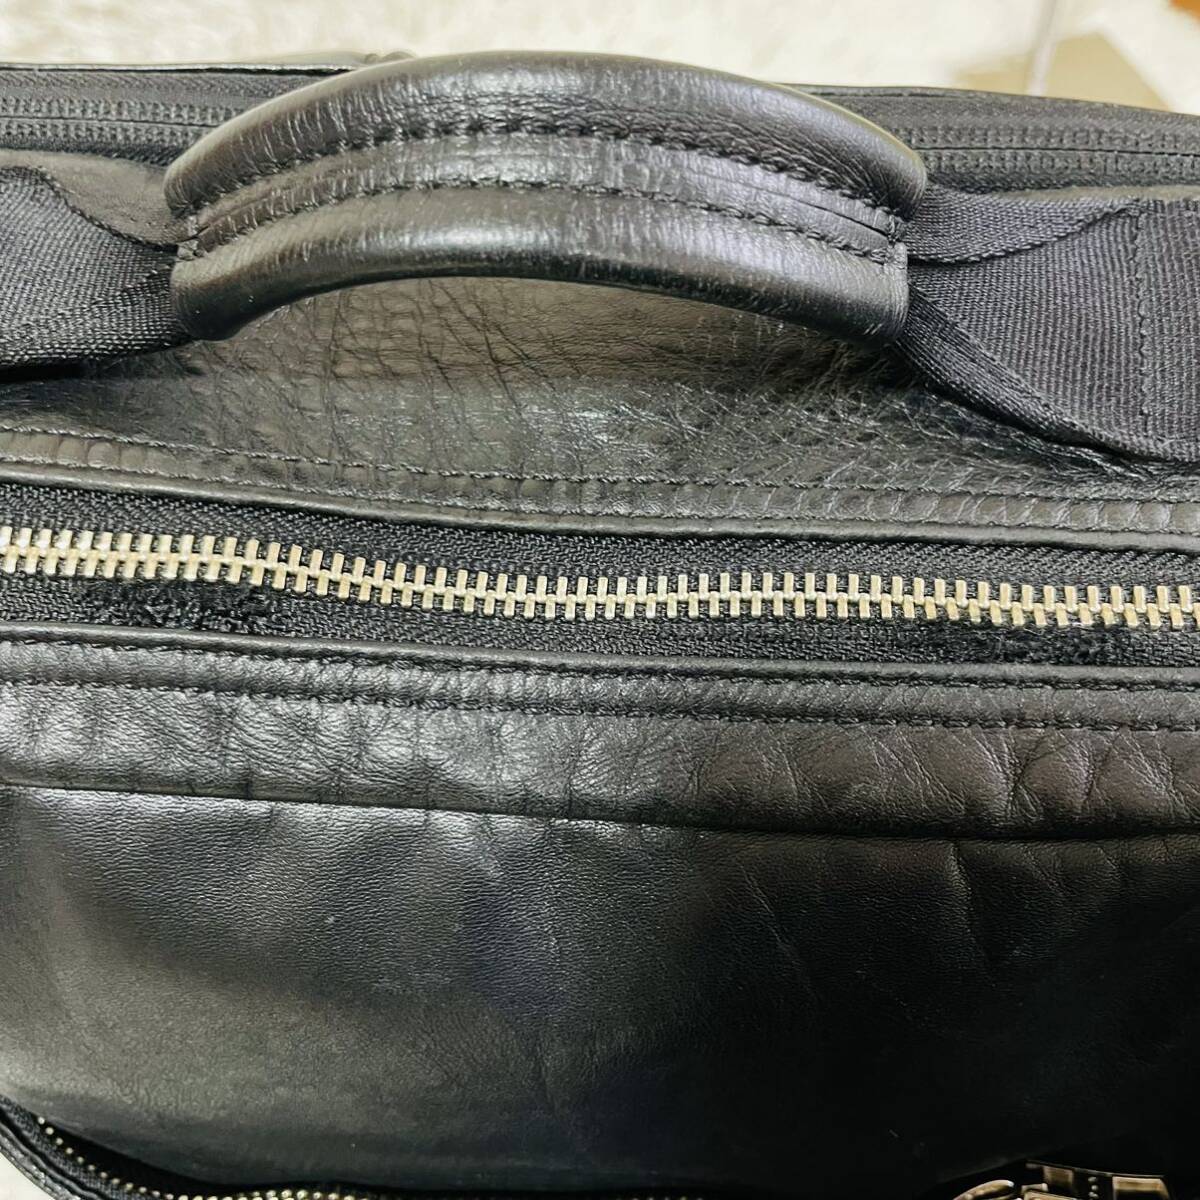 1 jpy [ beautiful goods ] master-piece briefcase rucksack 2way all leather original leather black black high capacity pocket great number A4 possible 